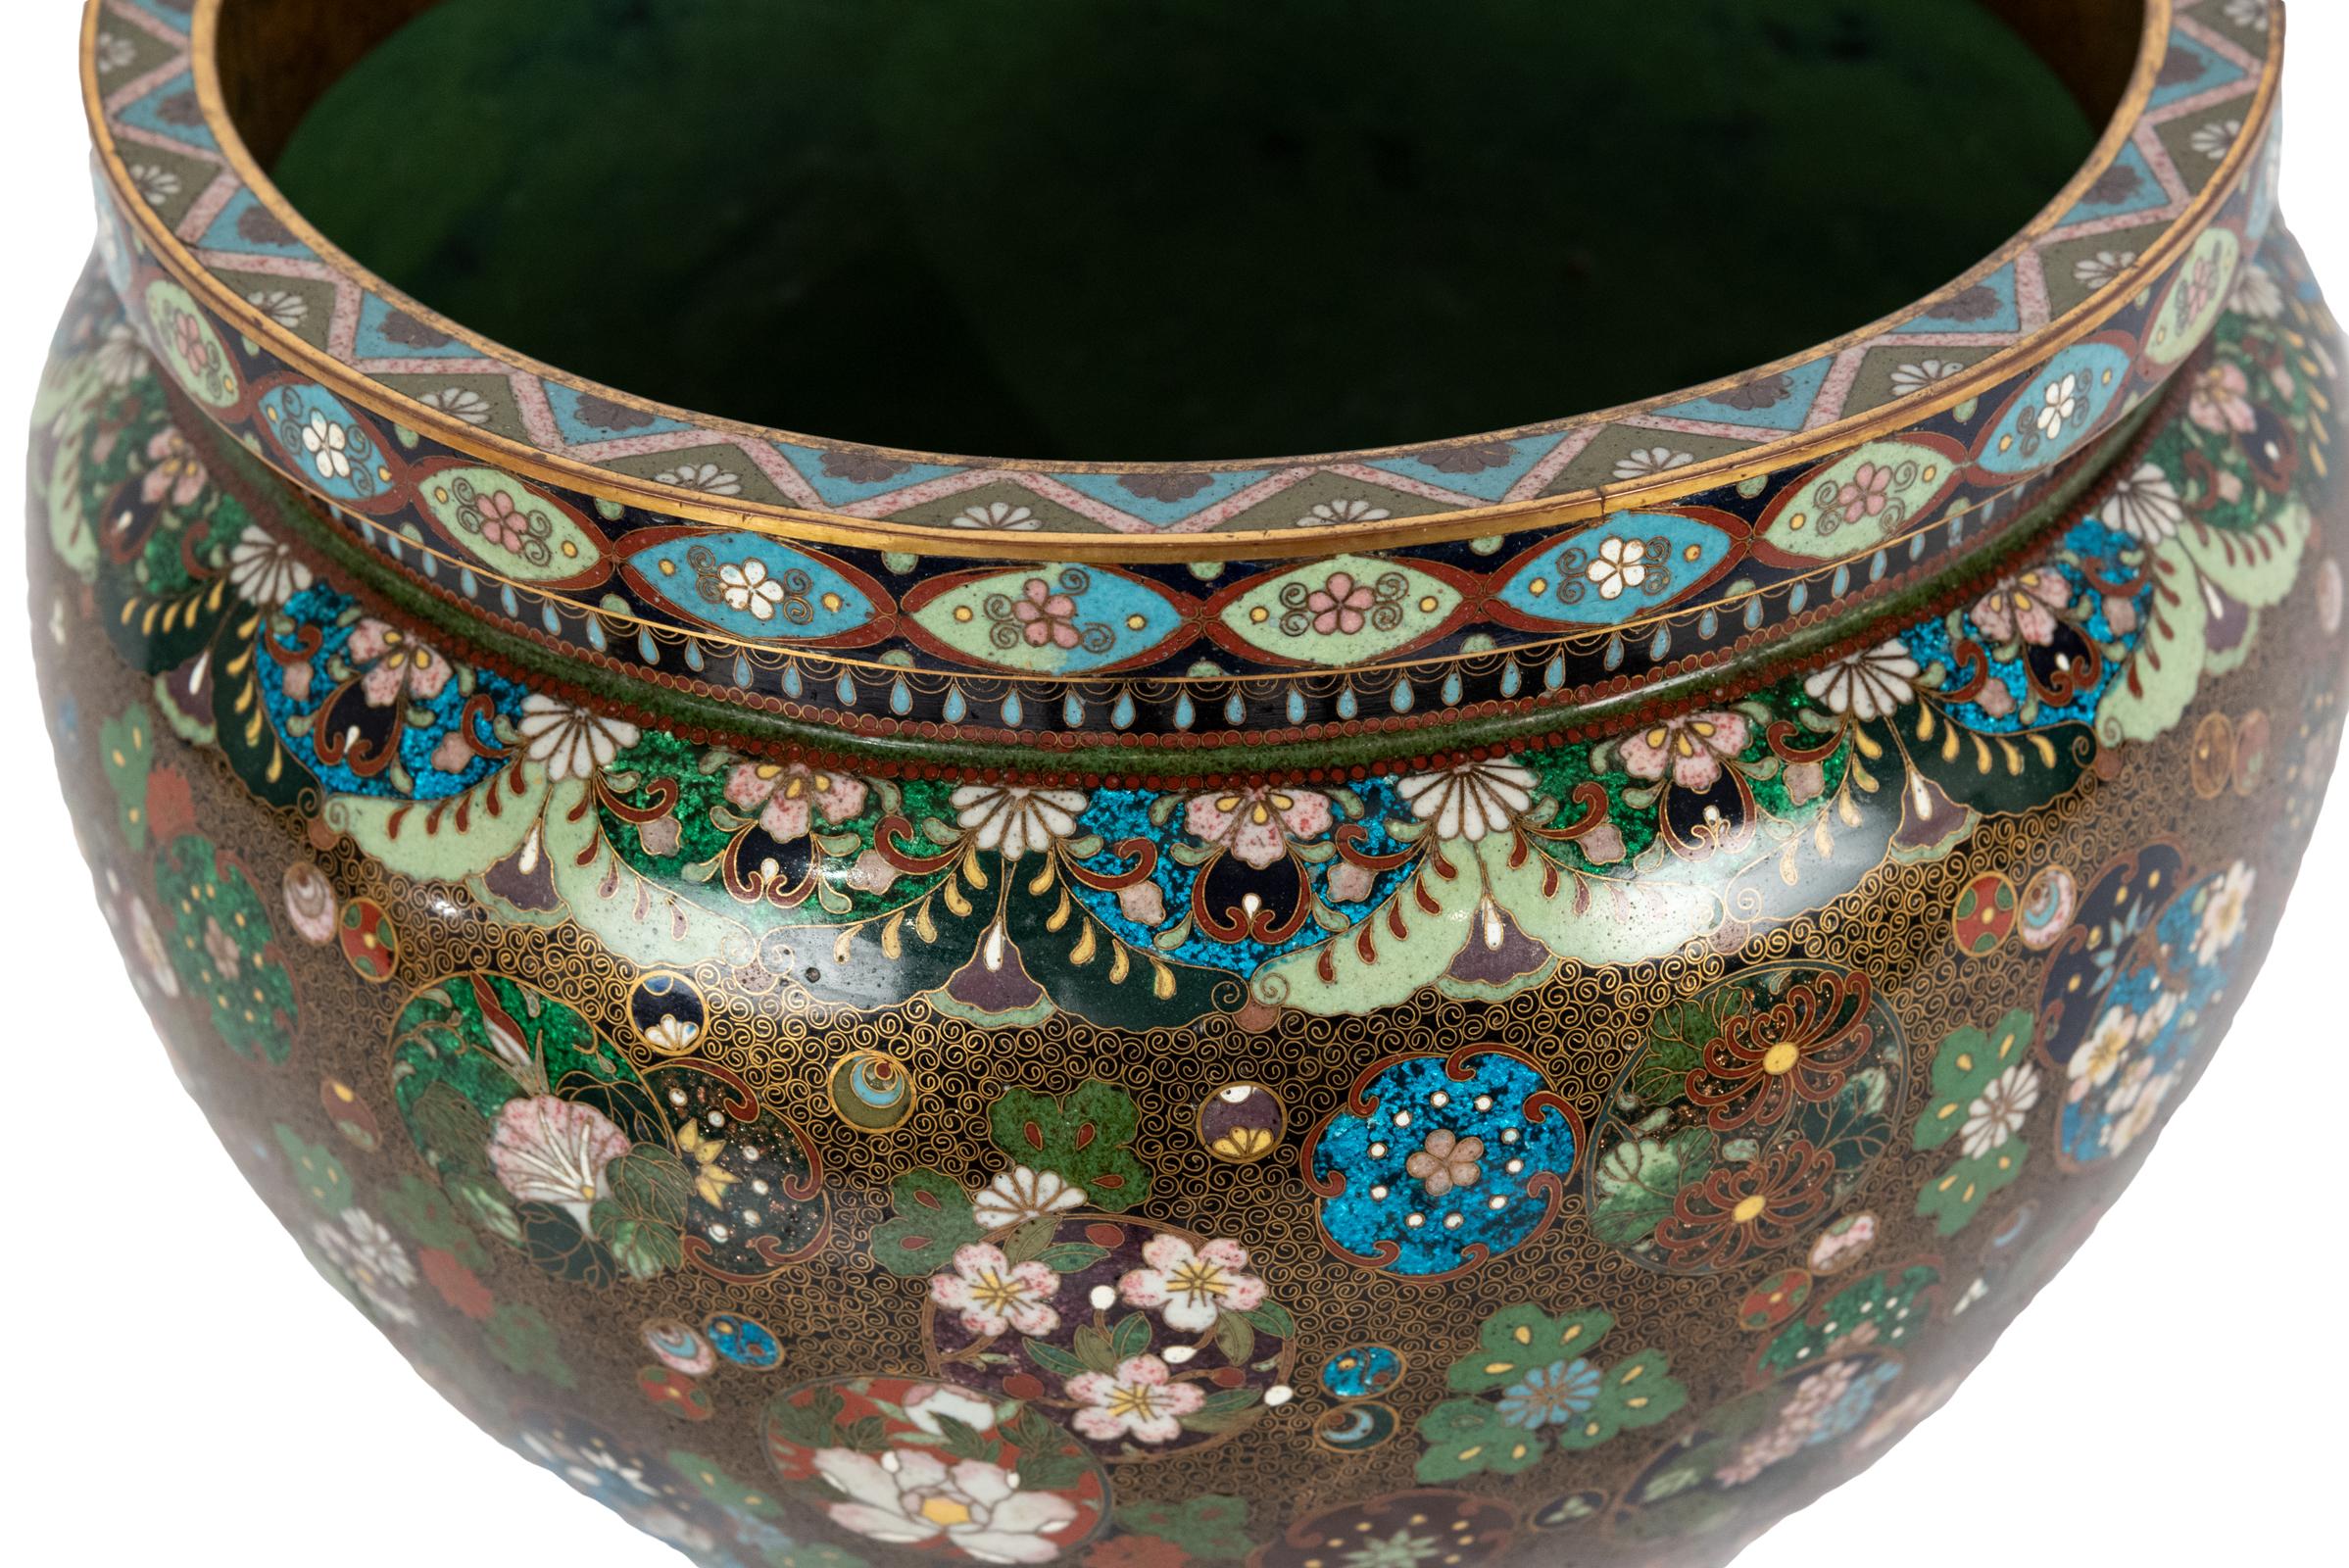 An excellent quality example of the finest Japanese Cloissoné, this jardinière is decorated with a variety of floral roundels, late 19th century.